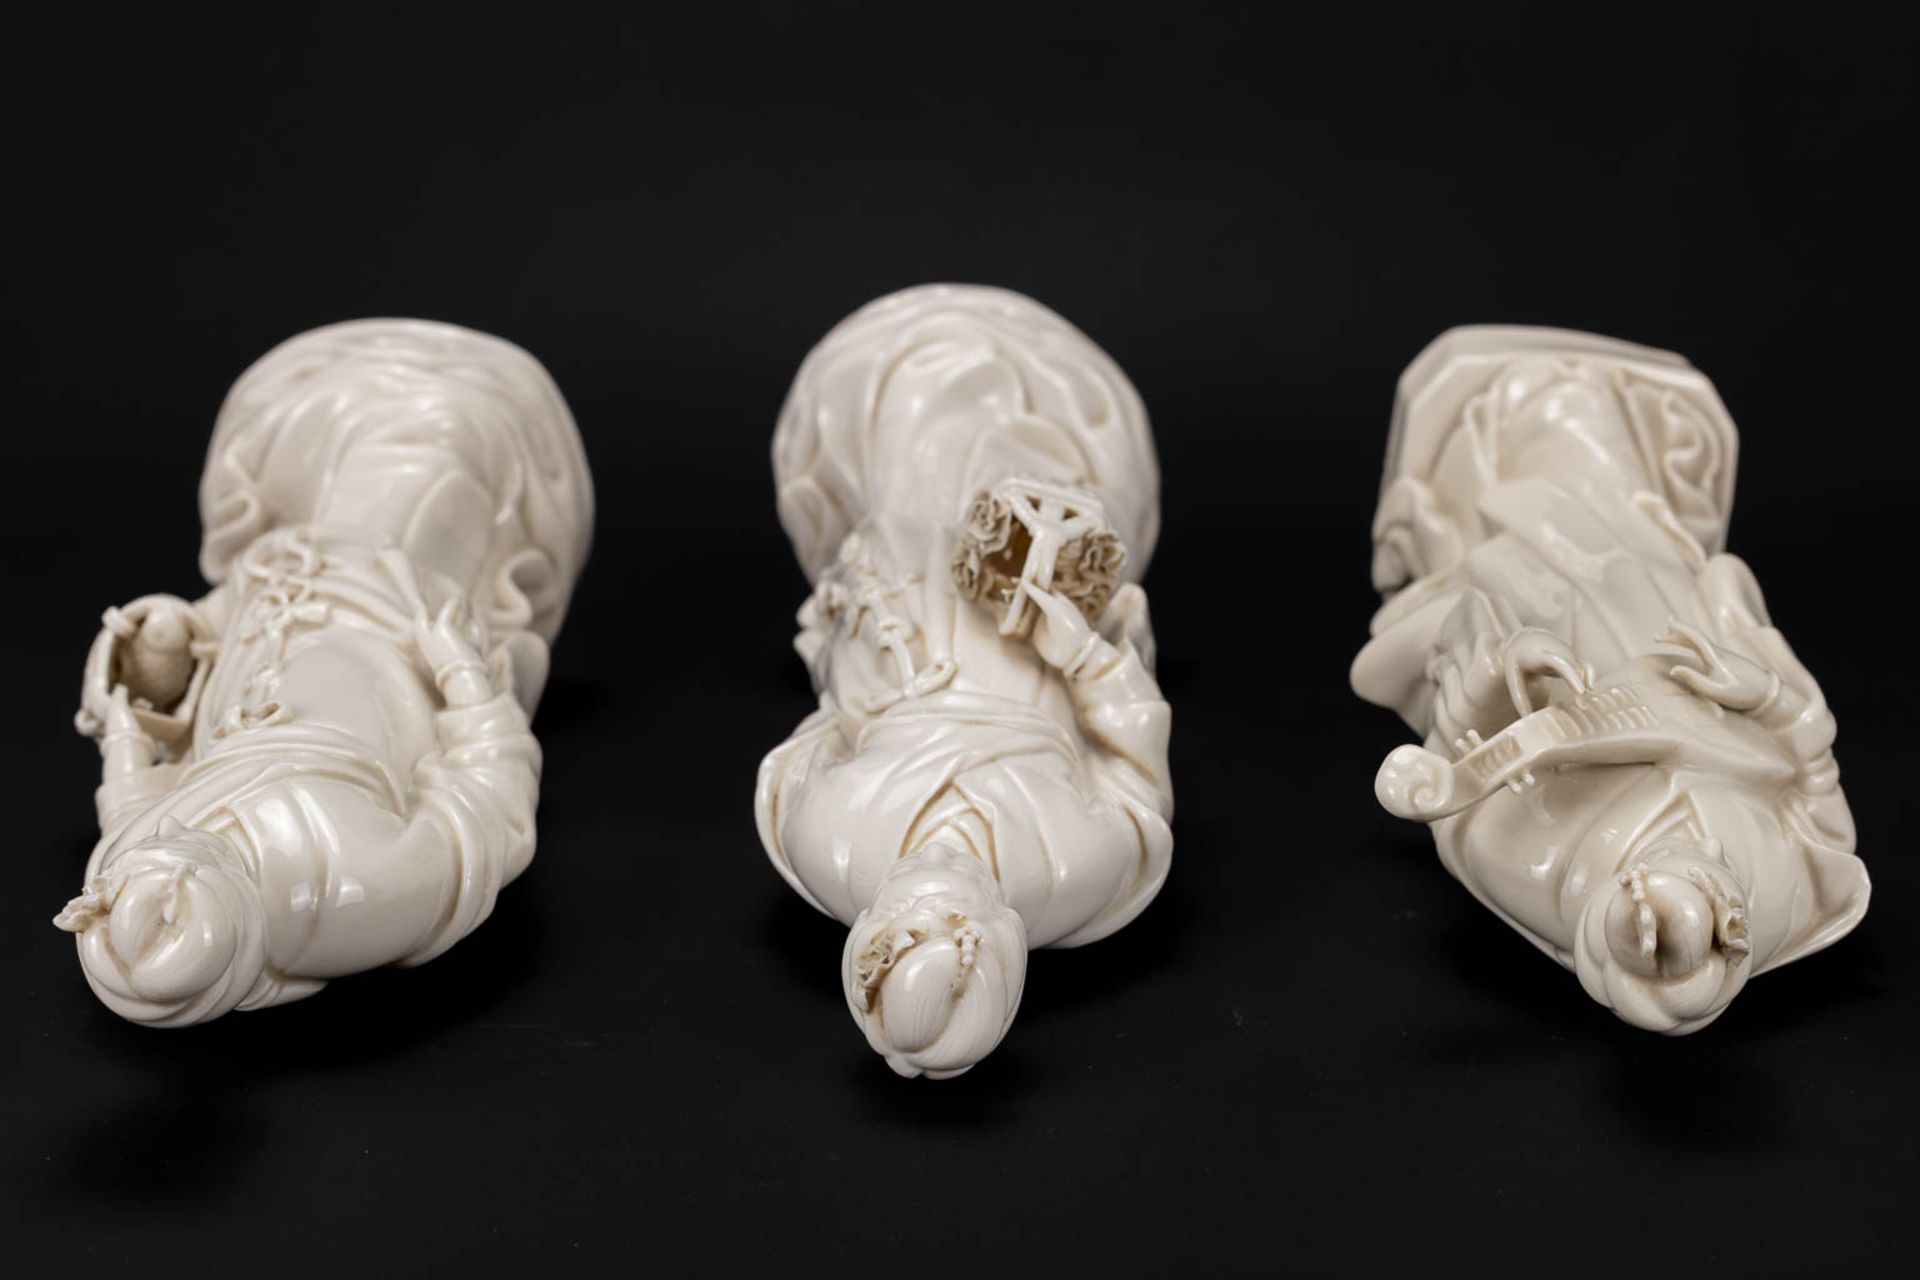 A collection of 3 female figurative statues 'Blanc De Chine' made of Chinese porcelain. - Image 11 of 16